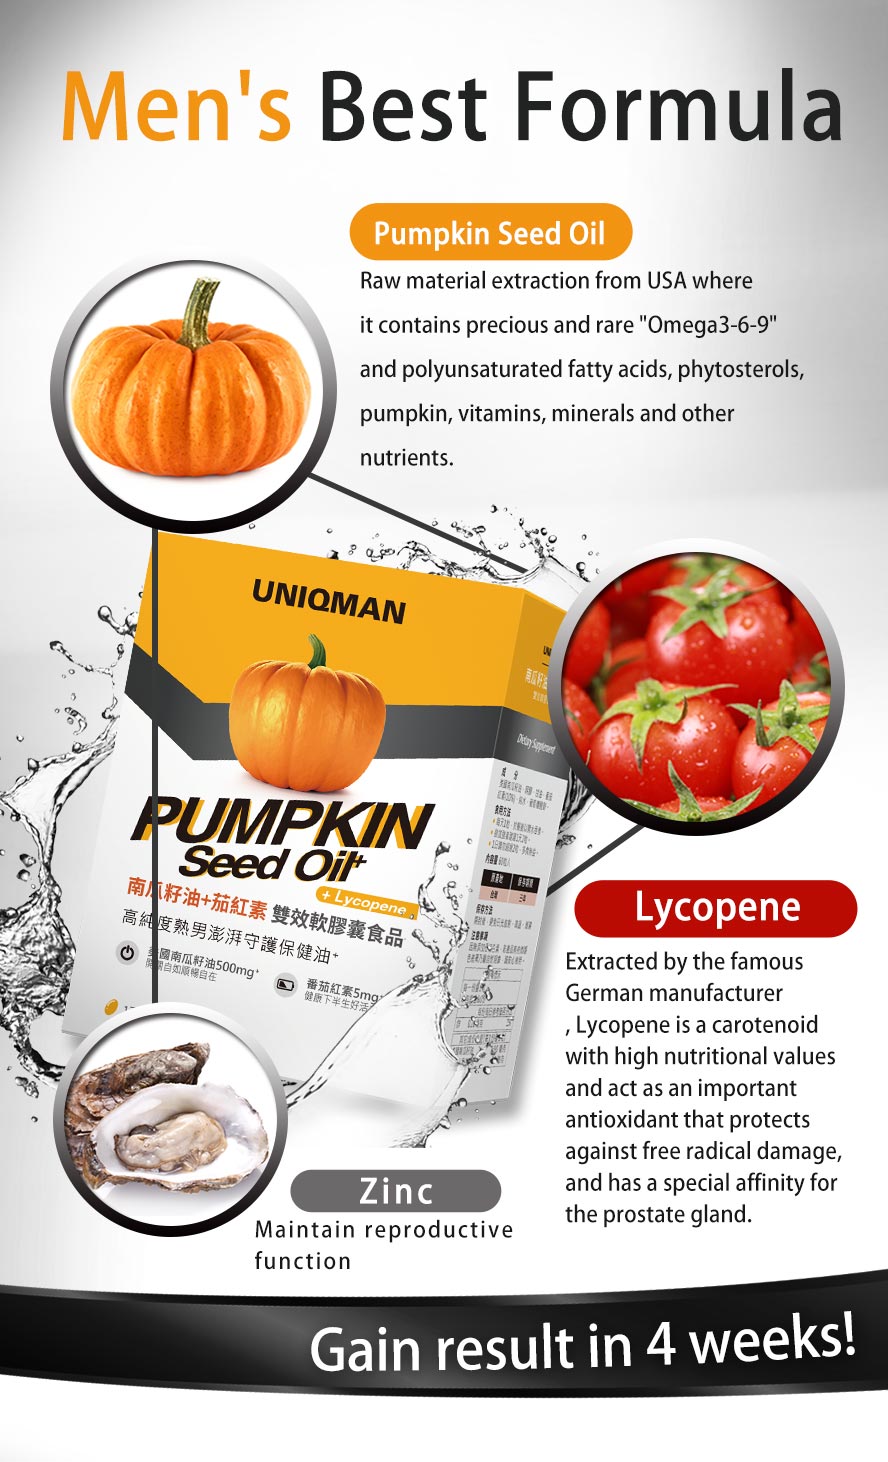 Not only with Pumpkin Seed Oil, UNIQMAN added Zinc and Lycopene to enhance overall man's urination health, efective in one month